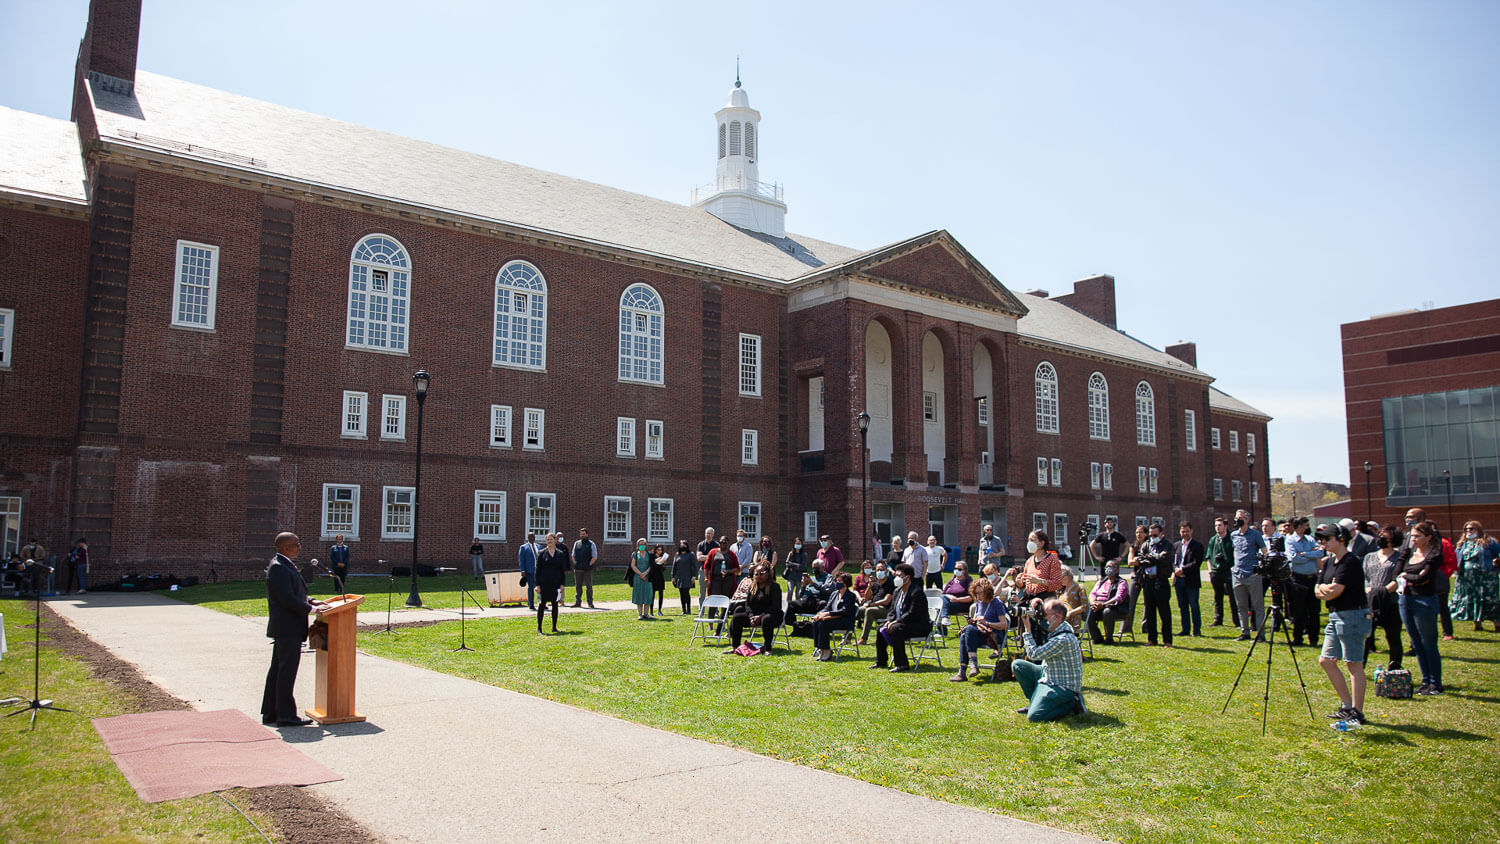 On April 14, the campus community came together to remember colleagues who passed away due to COVID-19.